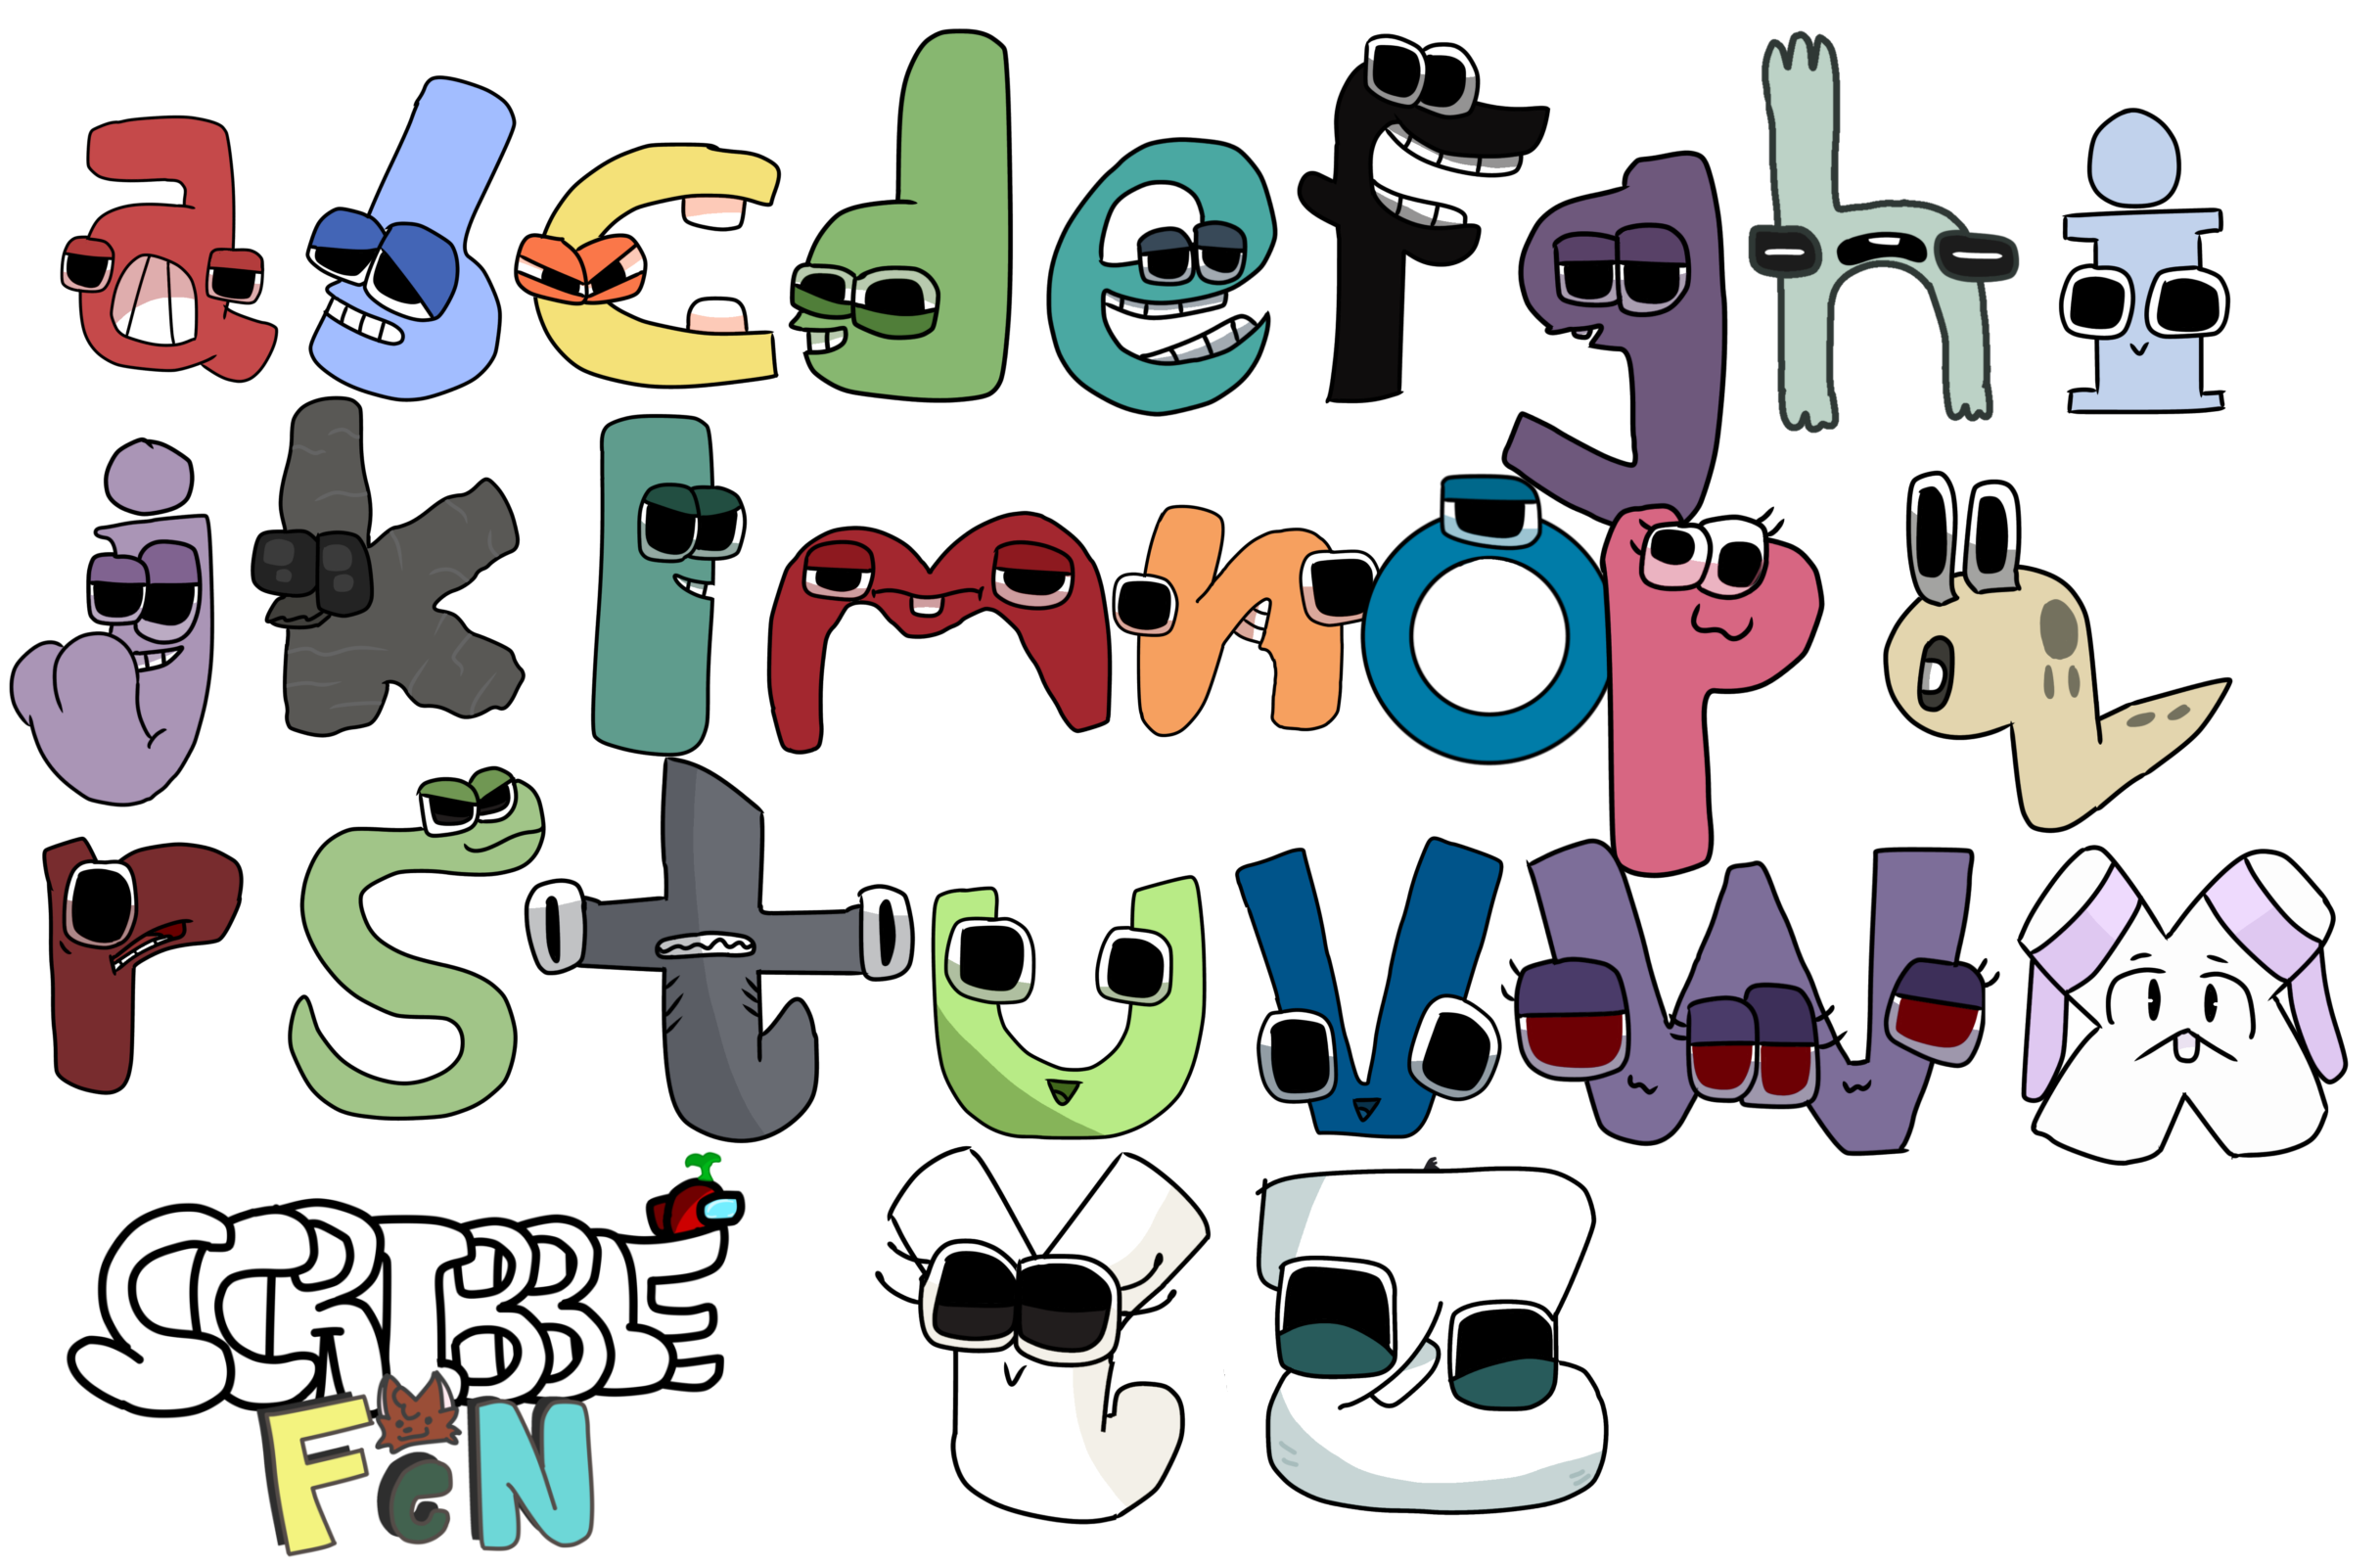 Lowercase Letter Lore by FluffyIsCool2022 on DeviantArt